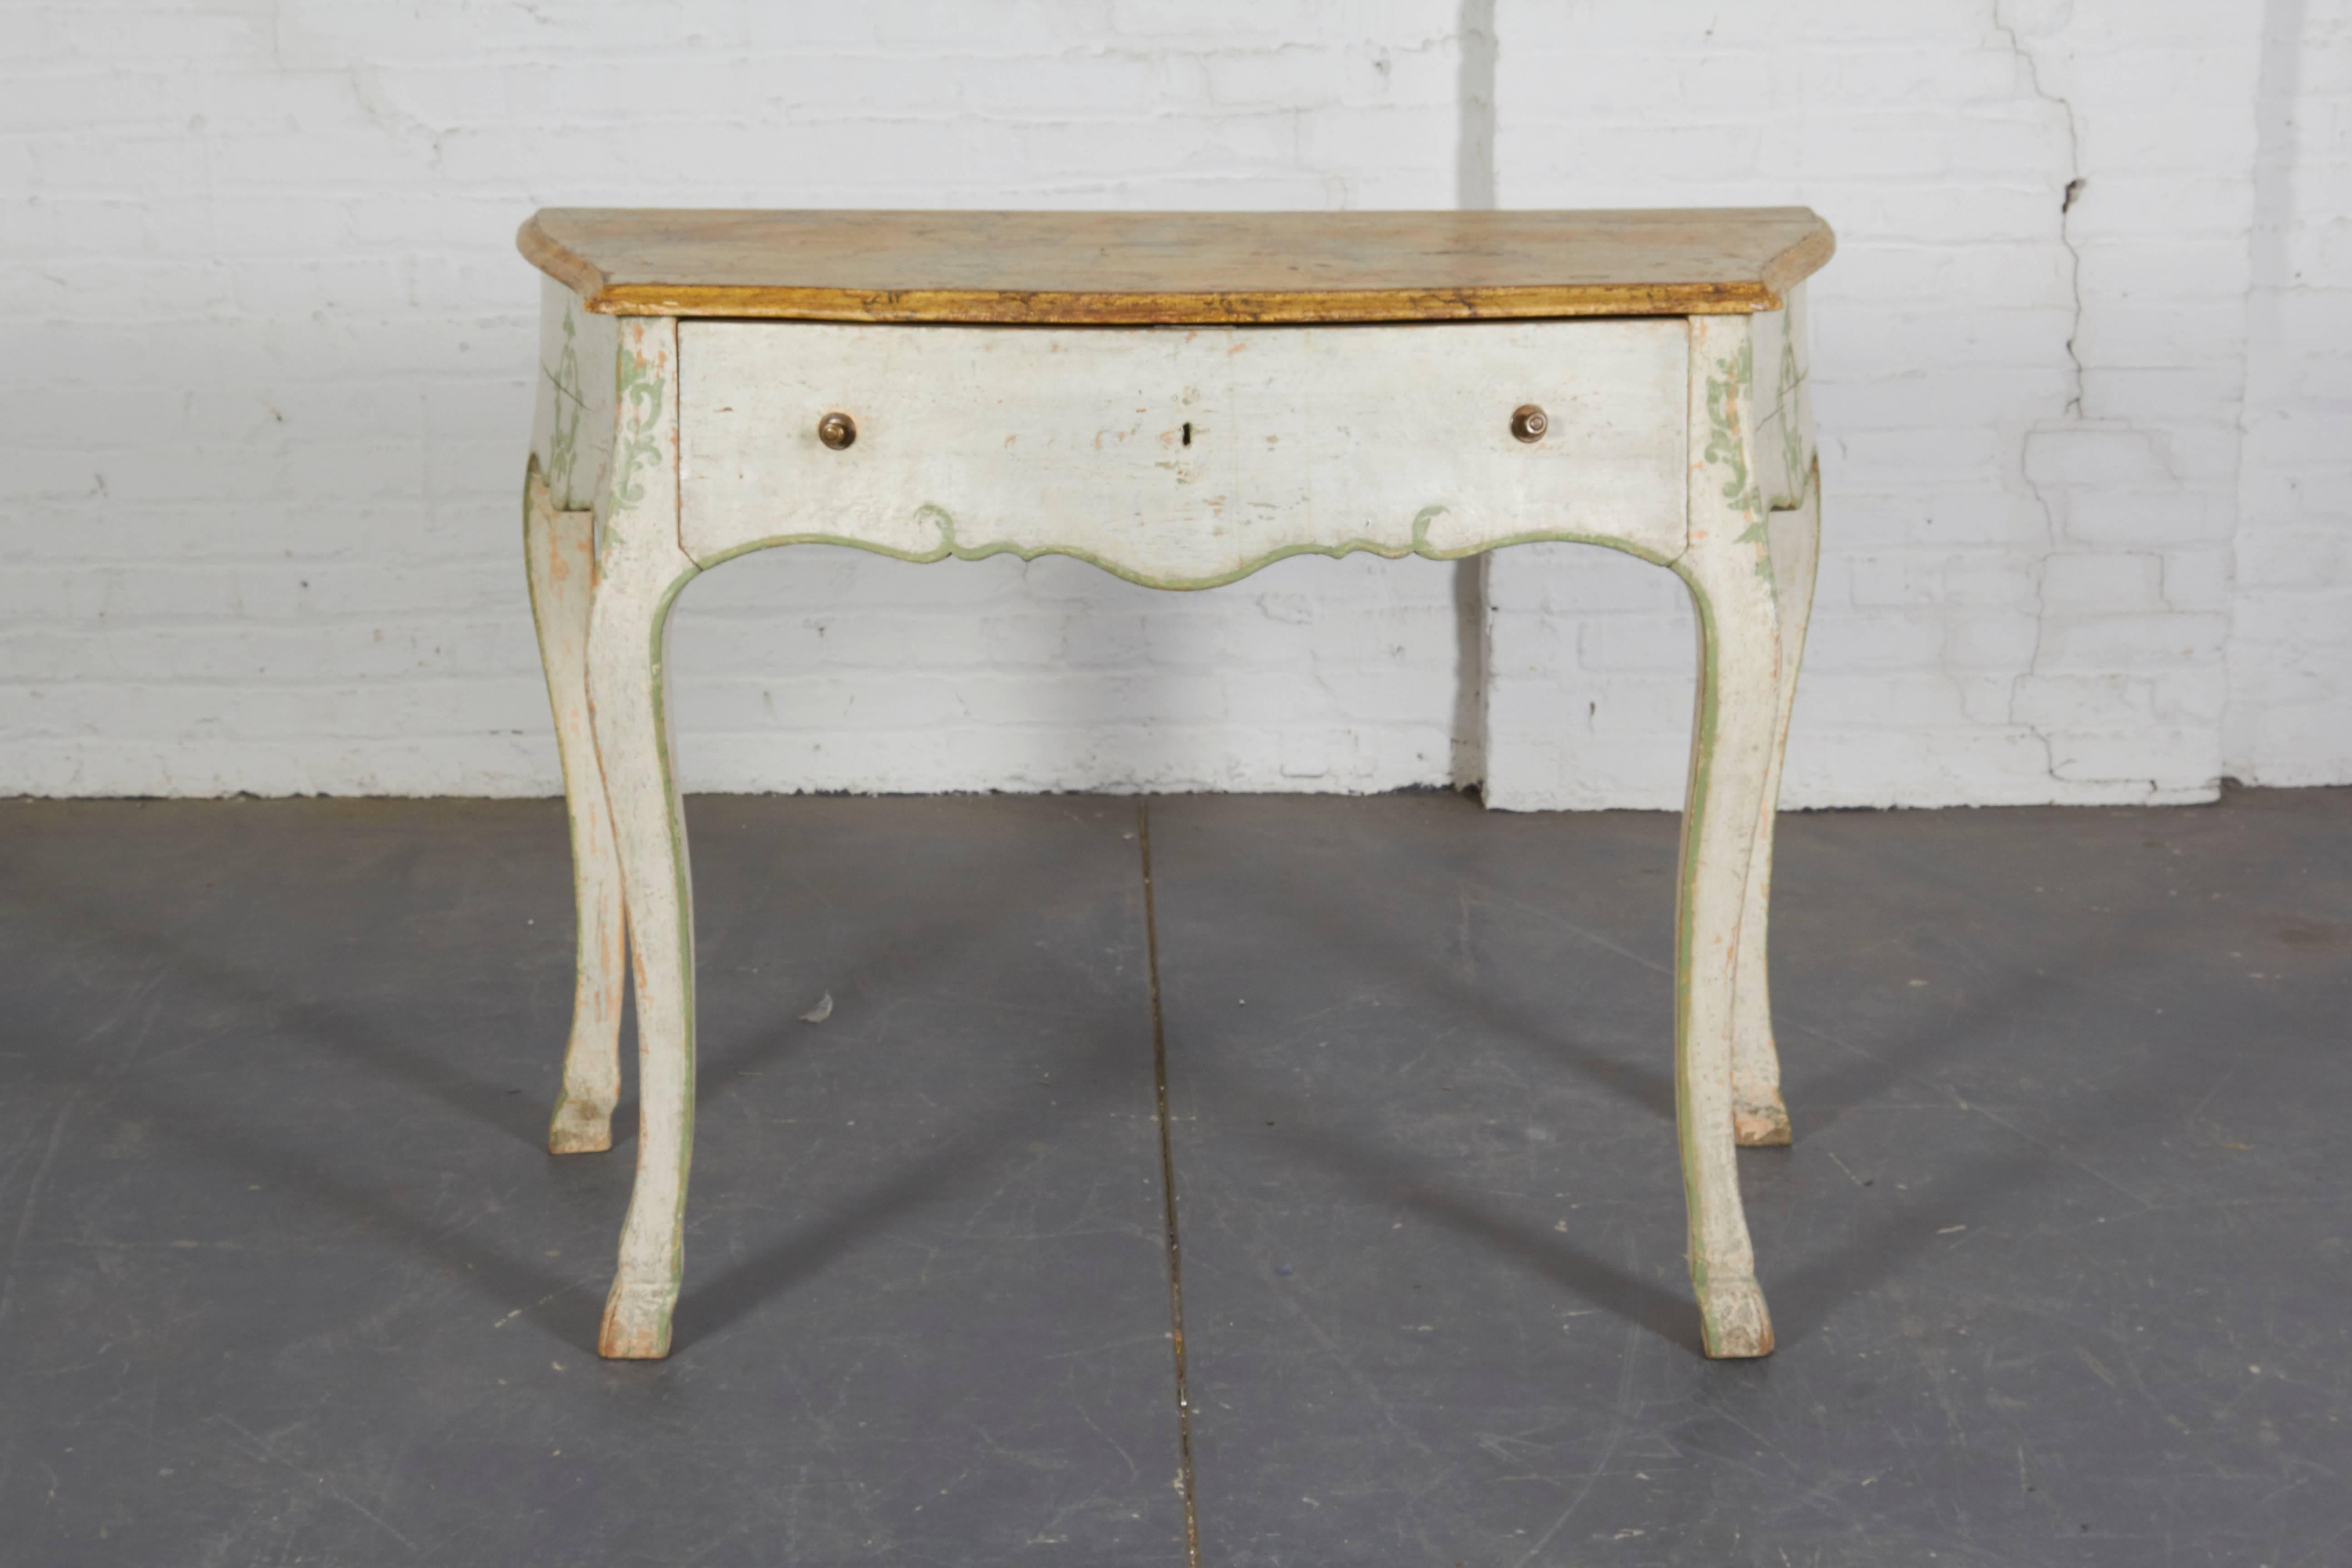 Each with faux marble top of bombe form over a frieze drawer raised on cabriole legs ending in hoof-form feet. Painted in a chalky white with celadon green cartouche decoration and banding. Impressively scaled.